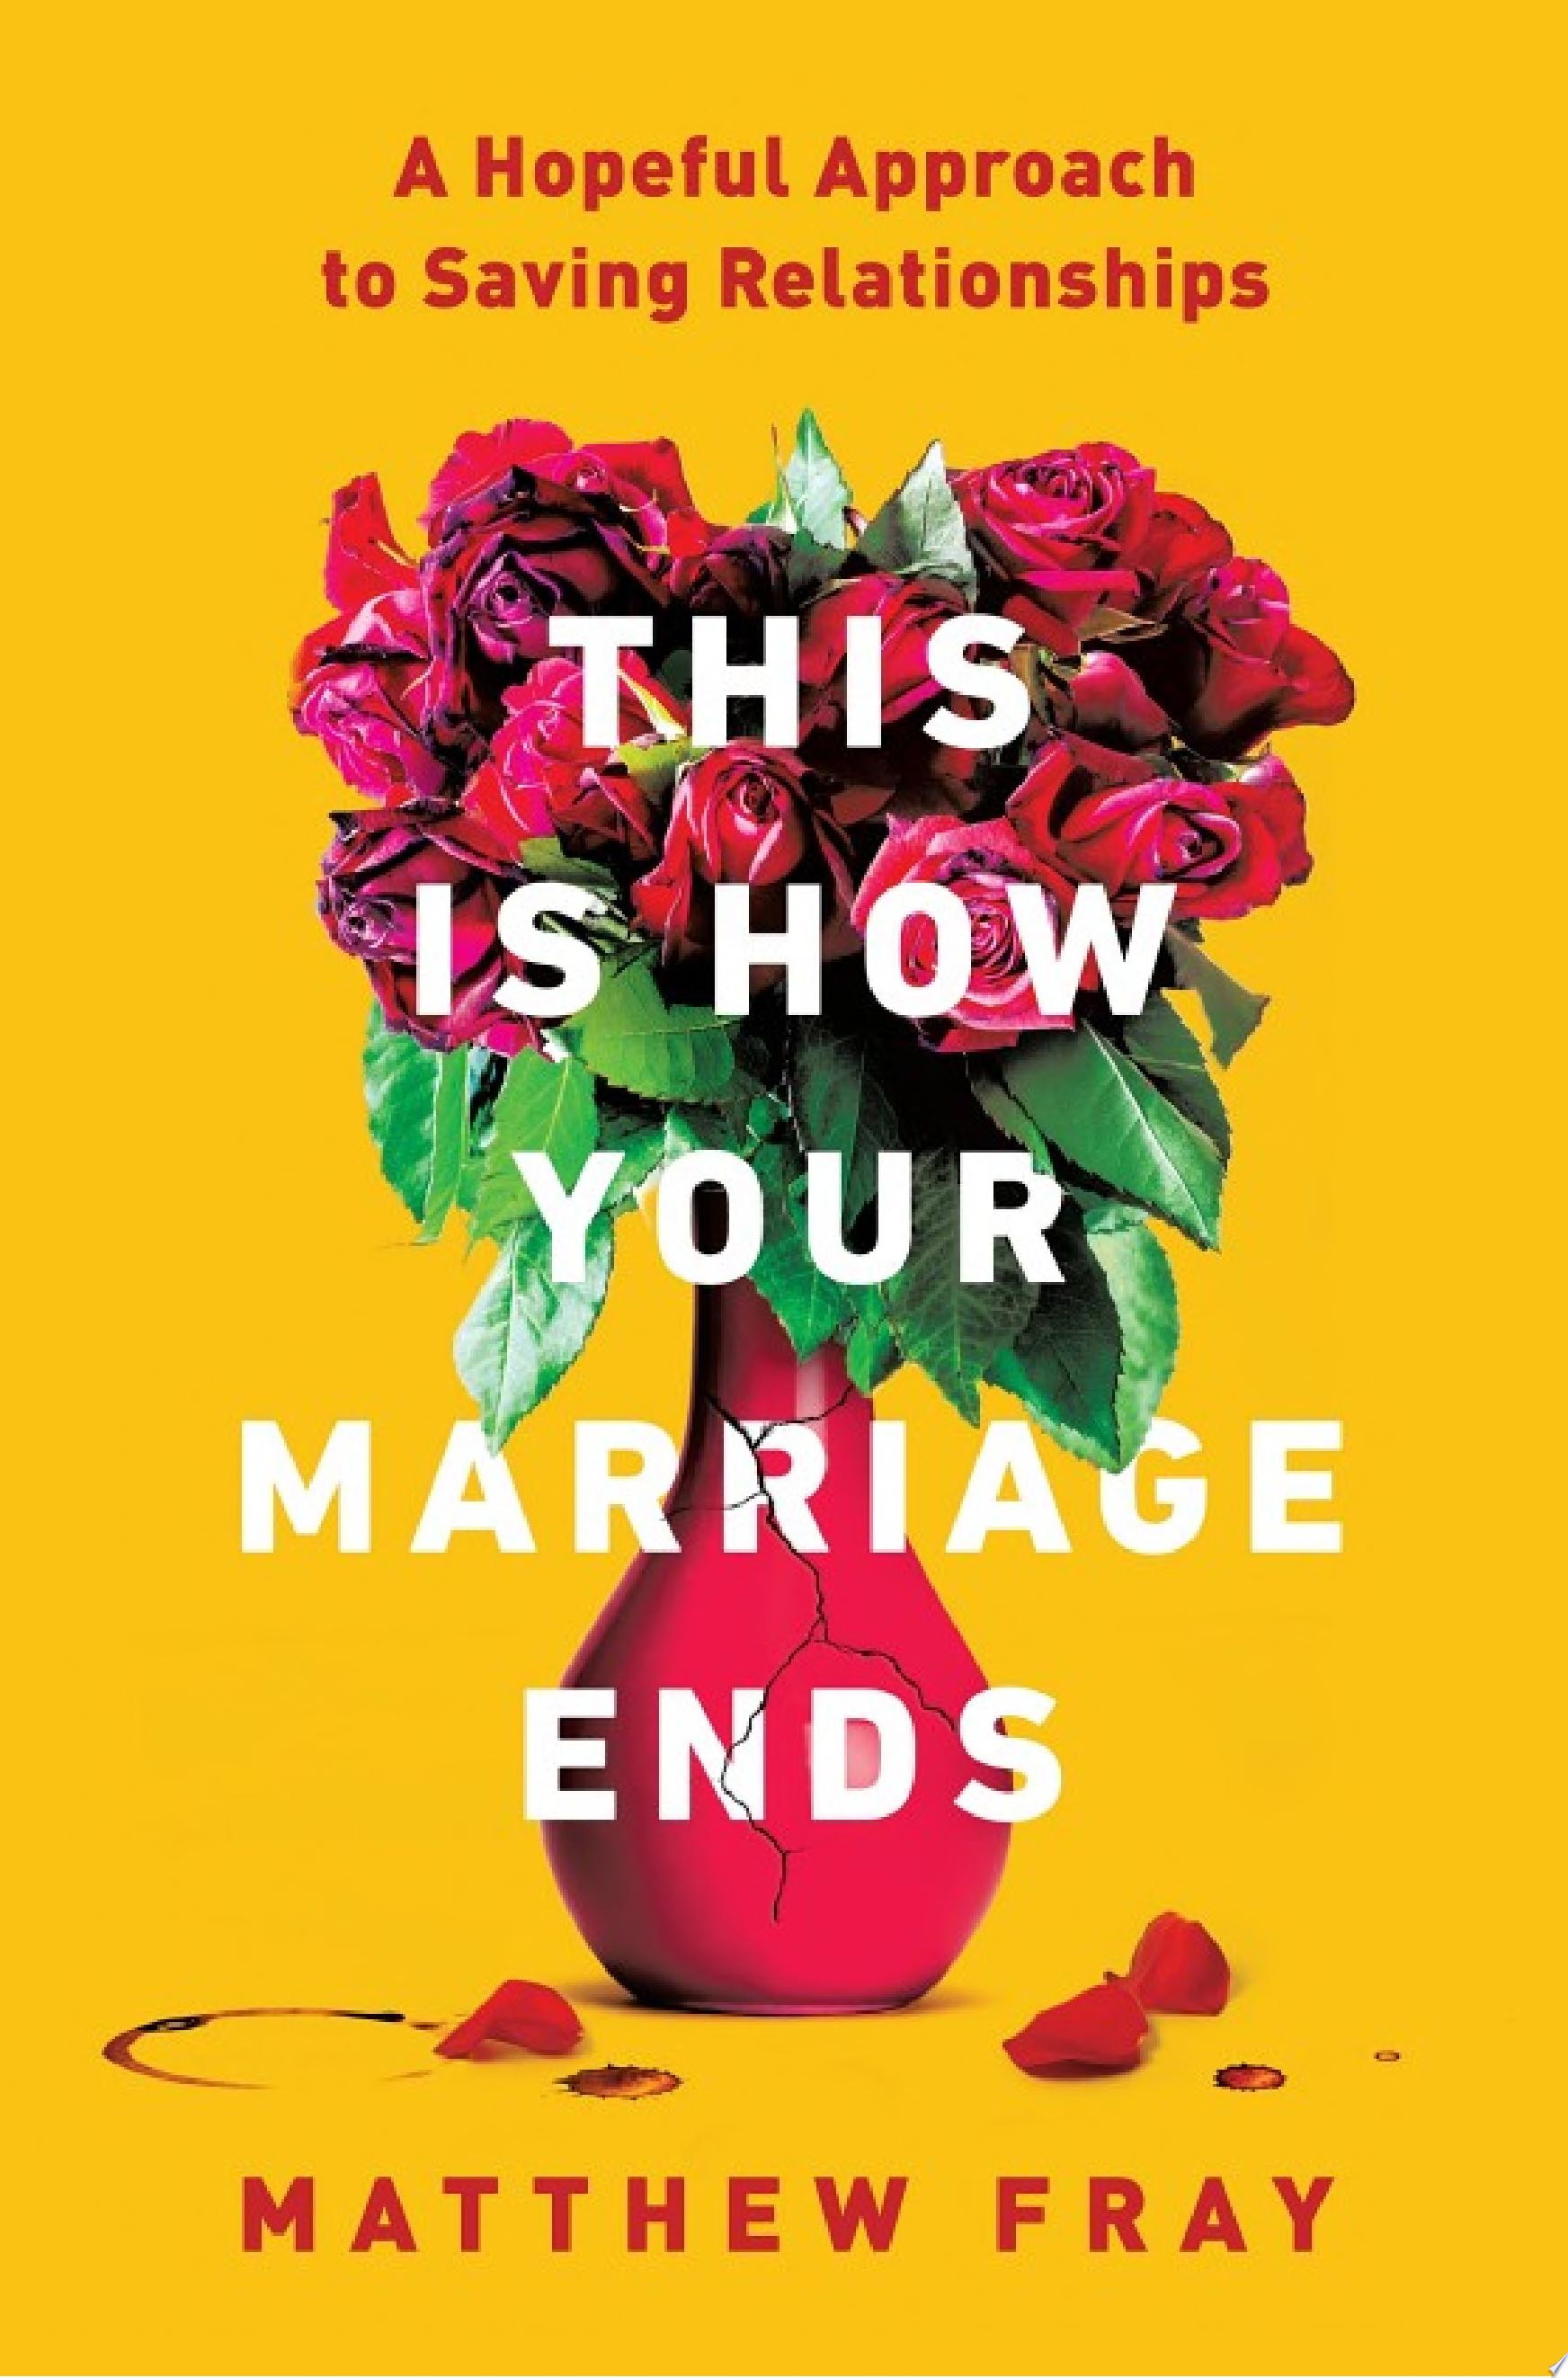 Image for "This Is How Your Marriage Ends"